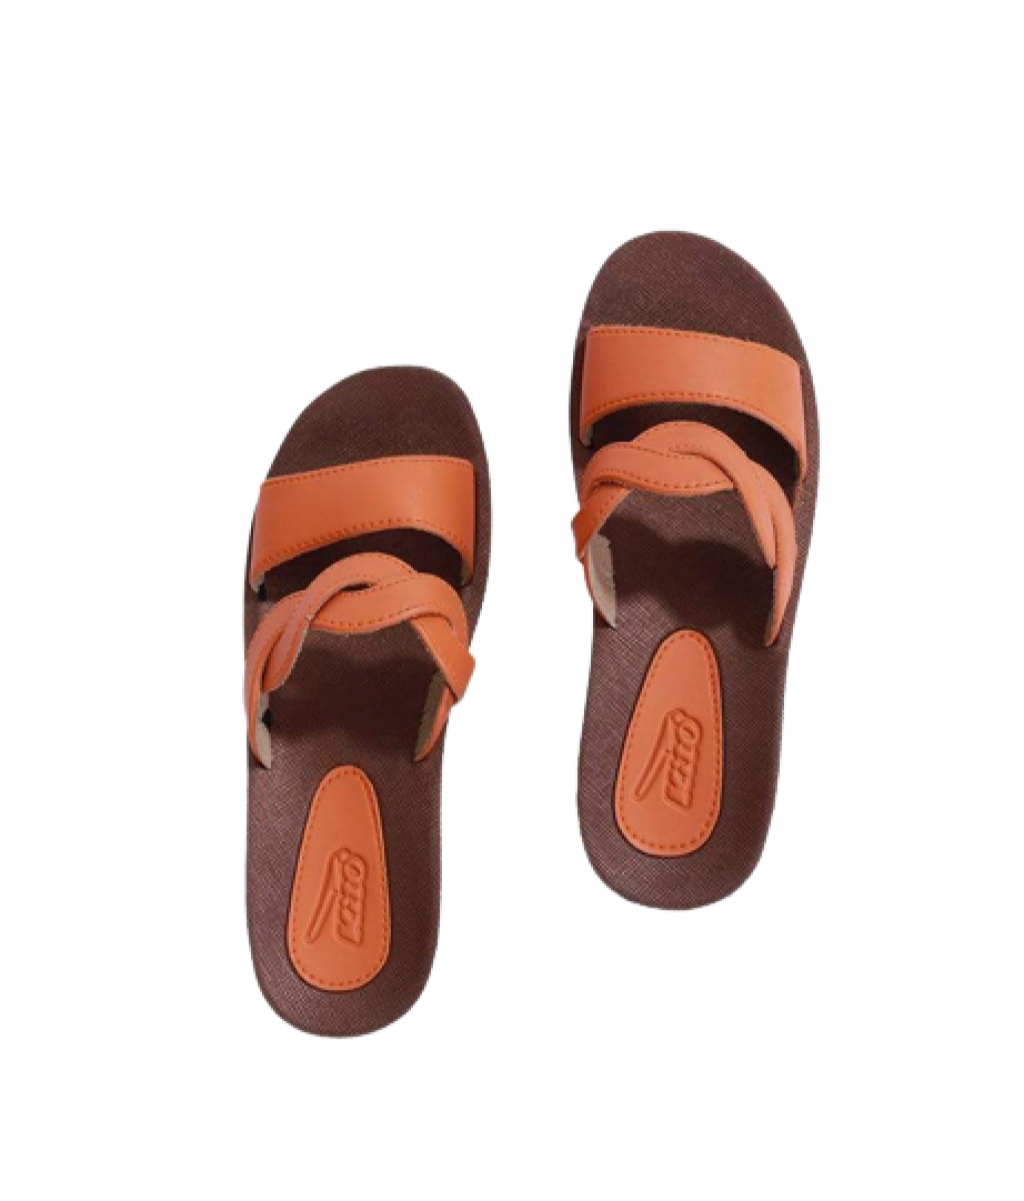 16615021900_kito-flipflop-slippers-kito-uw7050-29111679549613-removebg-preview.png